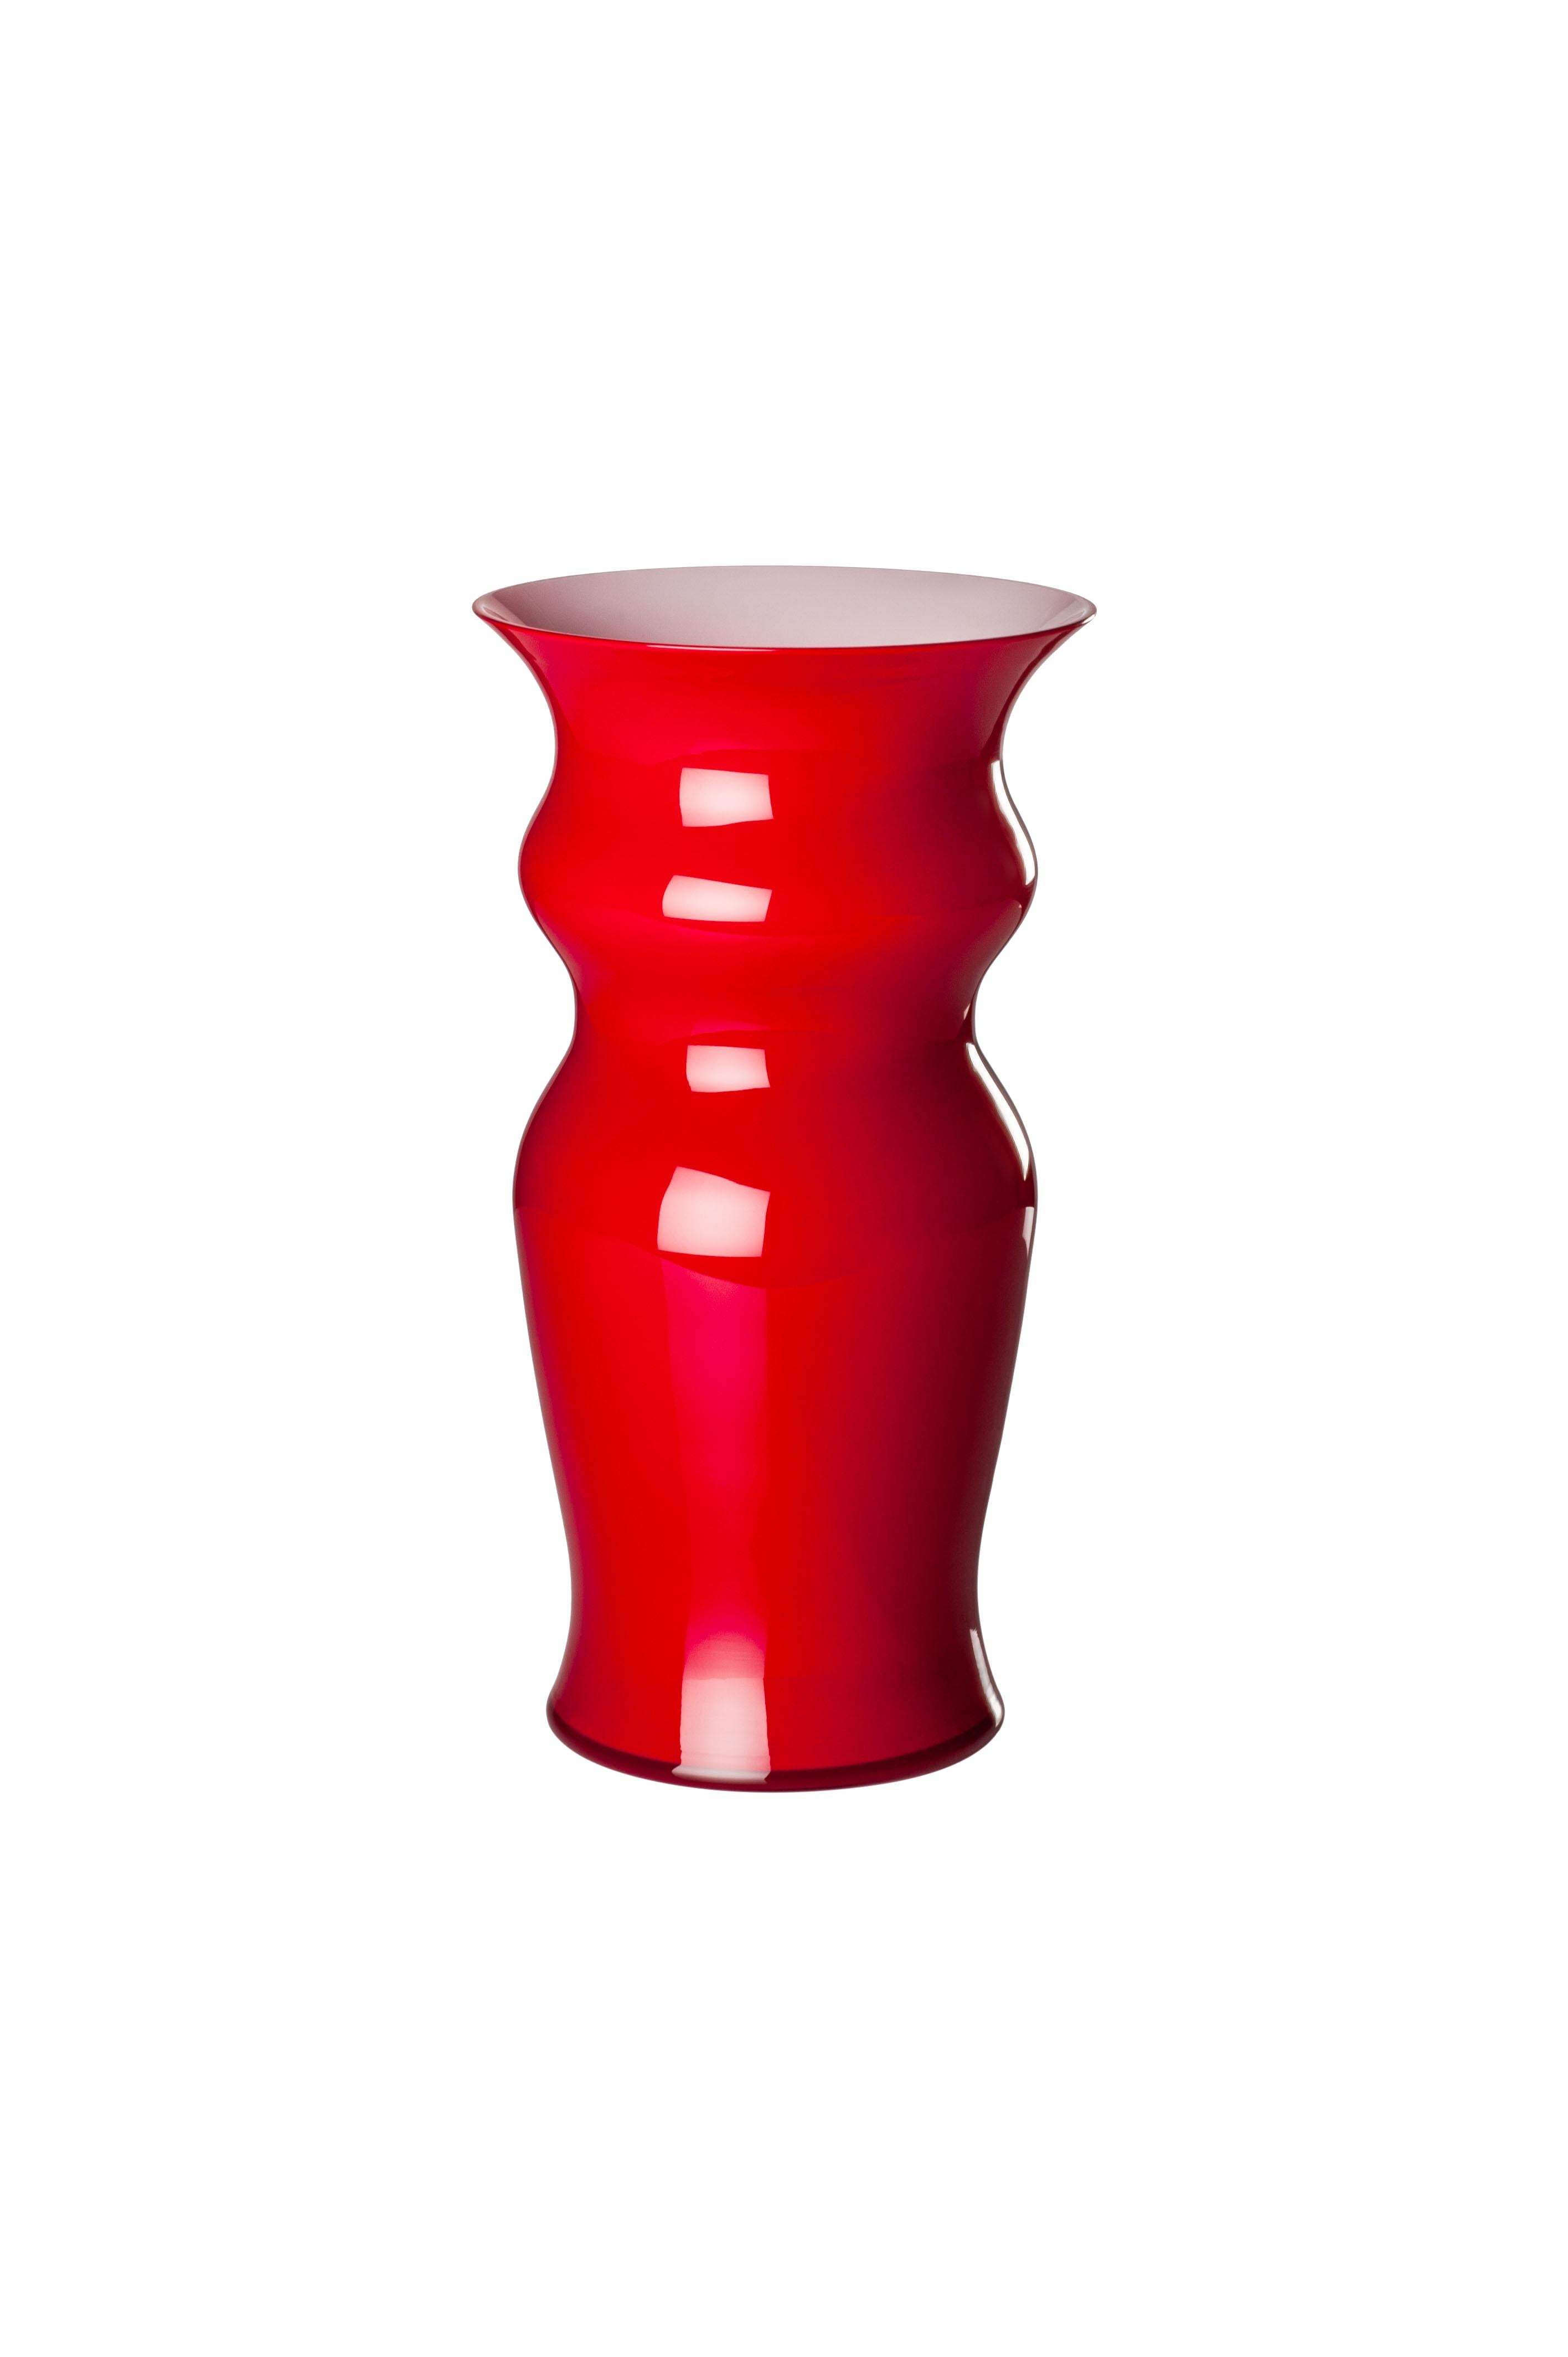 Venini glass vase with thin body and neck and elegant design by Leonardo Ranucci in 2009. Featured in red colored glass. Perfect for indoor home decor as container or strong statement piece for any room. Numbered edition for year.

Dimensions: 16